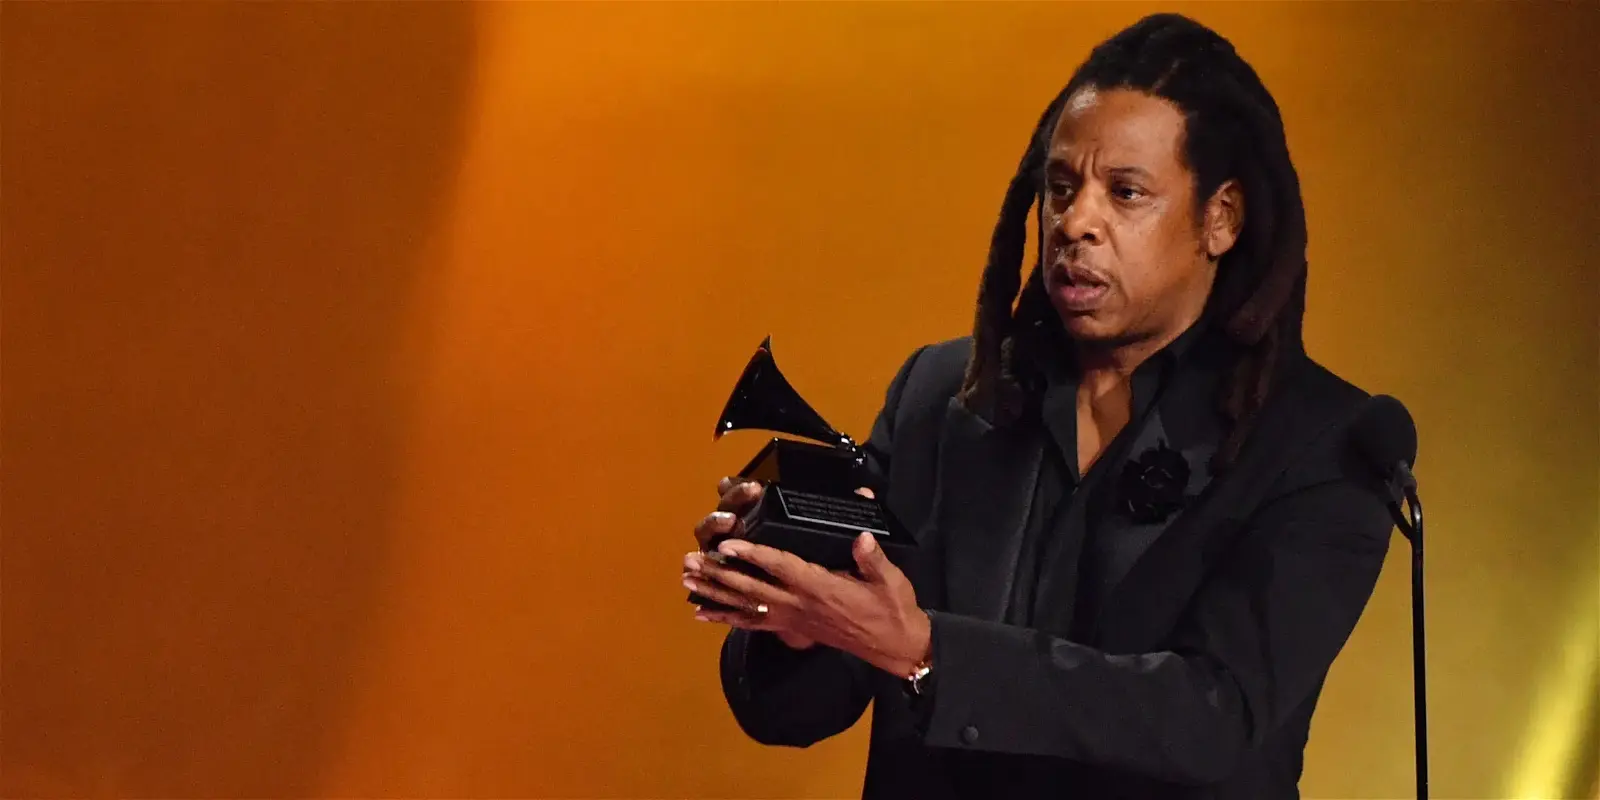 jay-zs-support-for-beyonce-at-grammys-praised-by-the-war-and-treaty